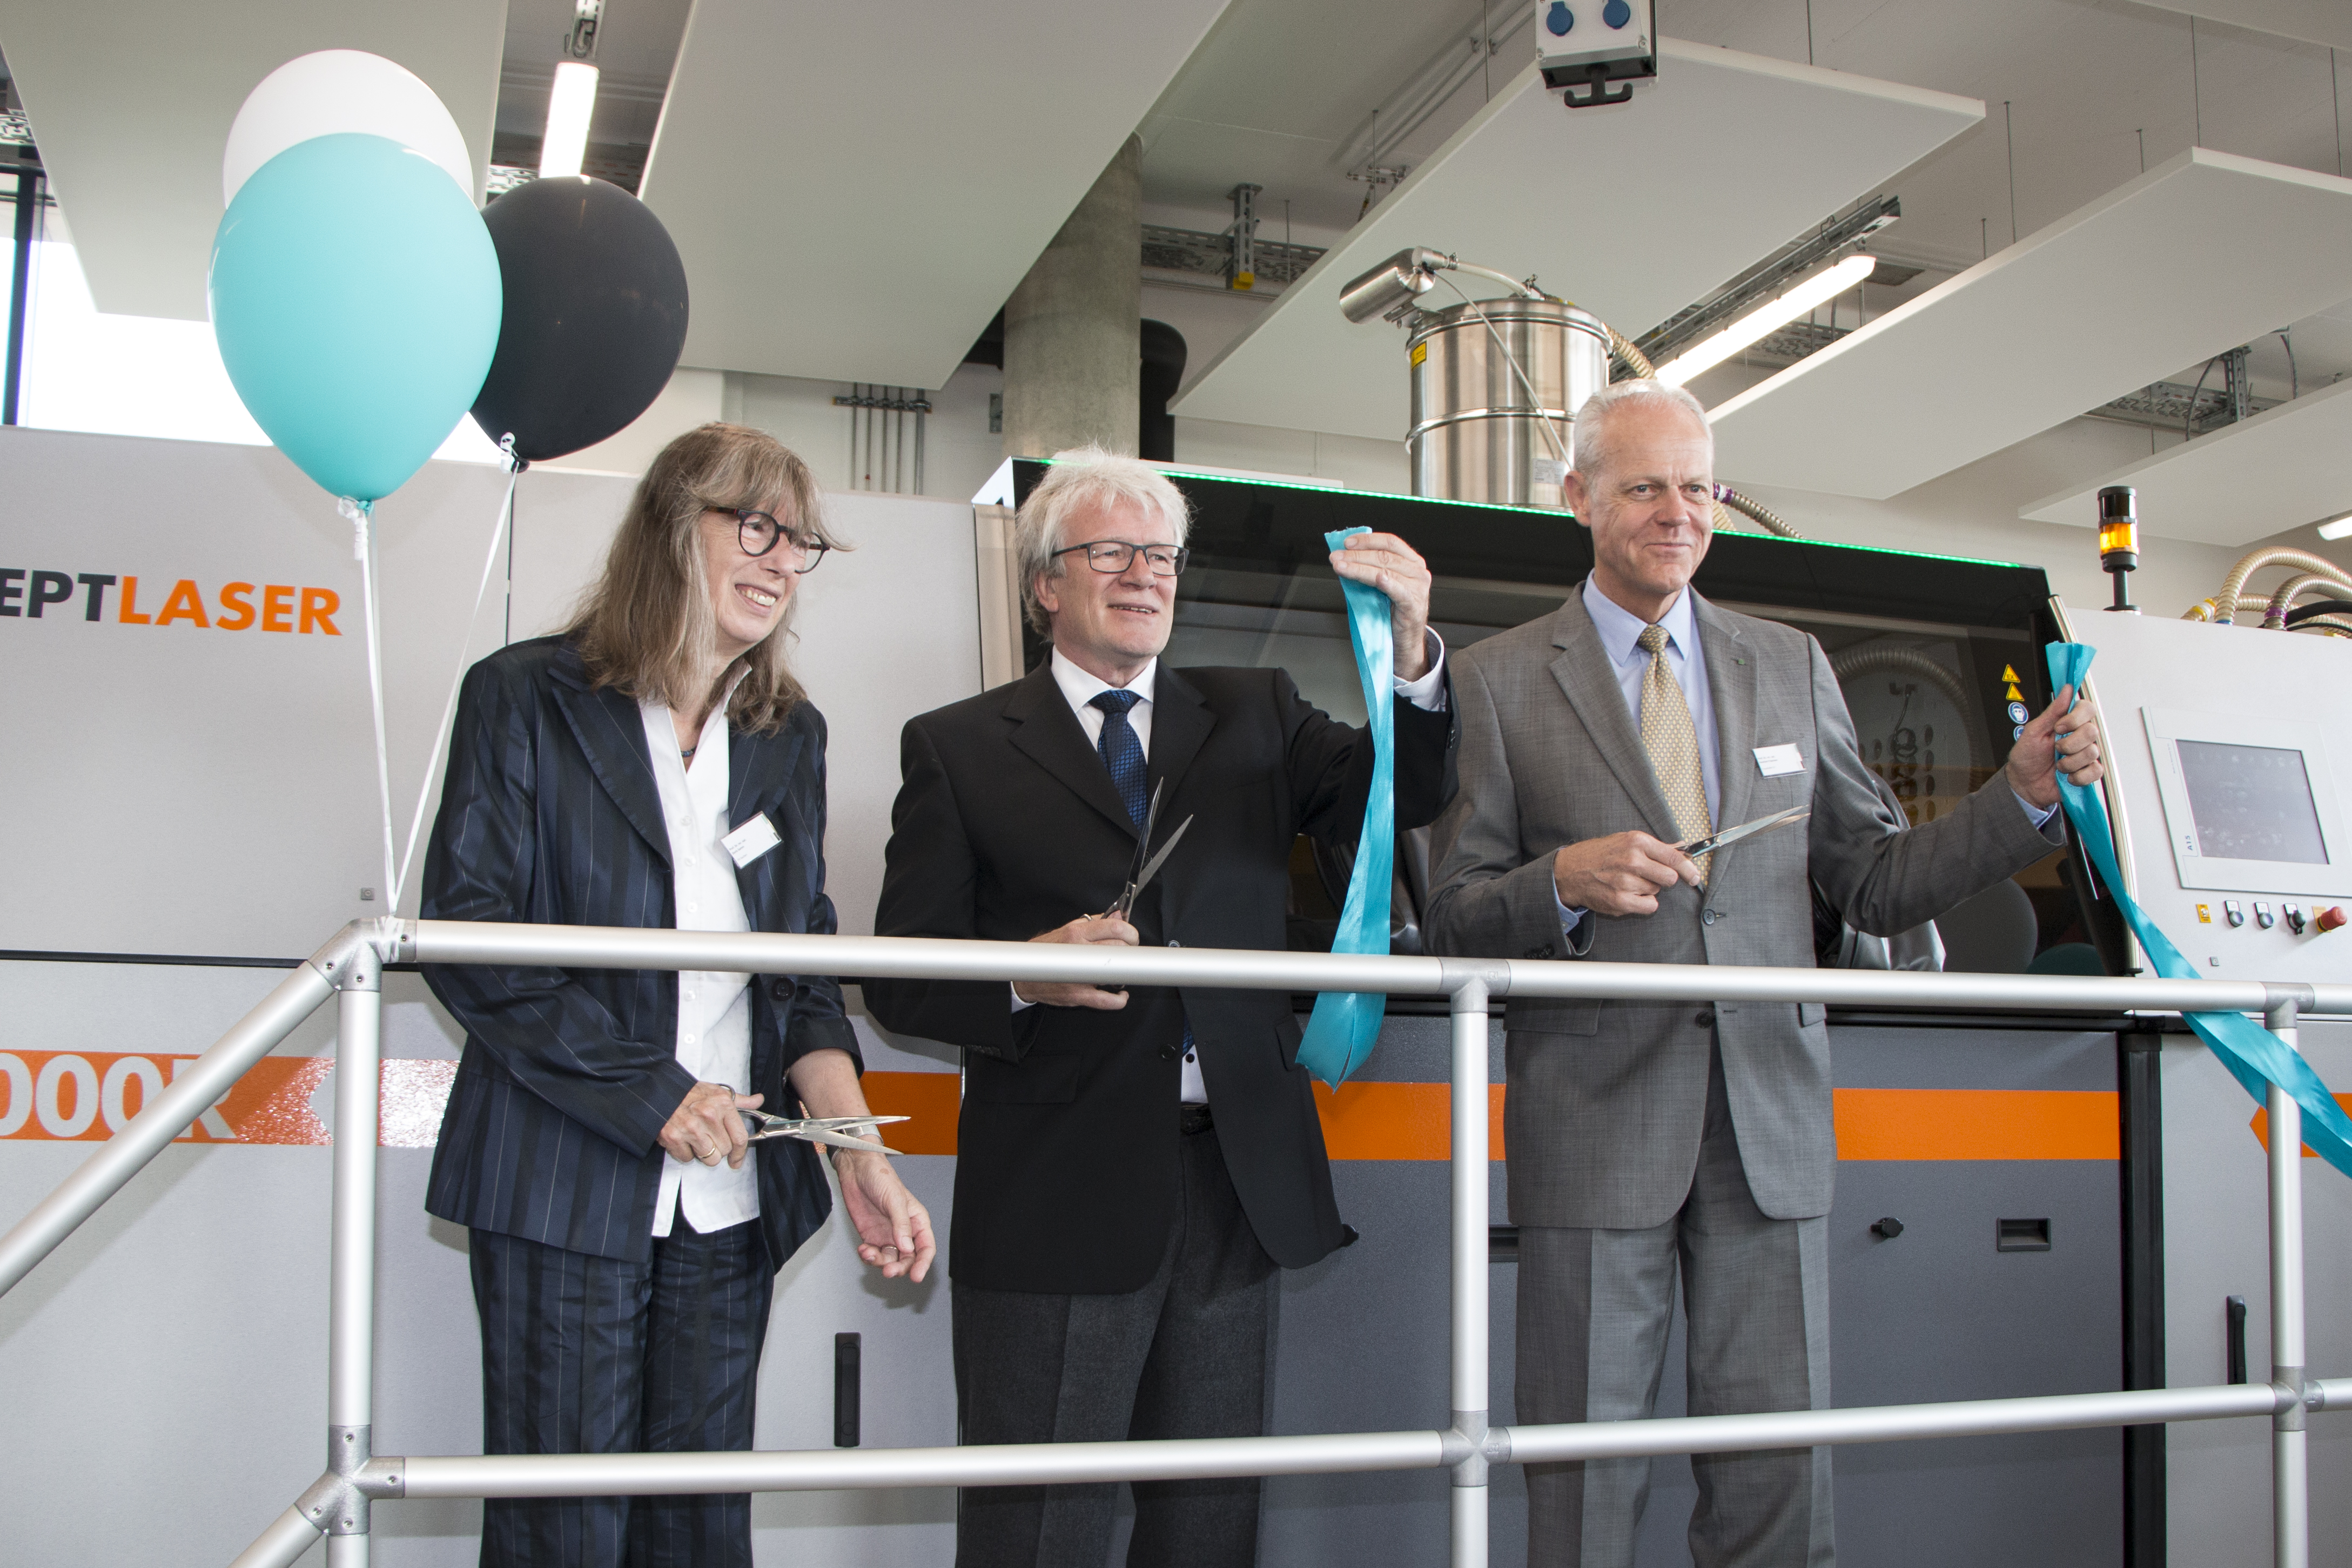 Grand Opening of XLine 2000R on June 1, 2017. f.l.t.r.: Prof. Dr. Doris Samm, Prorector for Research and Innovation at the Aachen University of Applied Sciences; Prof. Dr. Andreas Gebhard, Dean of department Mechanical Engineering and Mechatronics at the Aachen University of Applied Sciences; Prof. Dr. Reinhart Poprawe, Director of Fraunhofer Institute for Laser Technology ILT